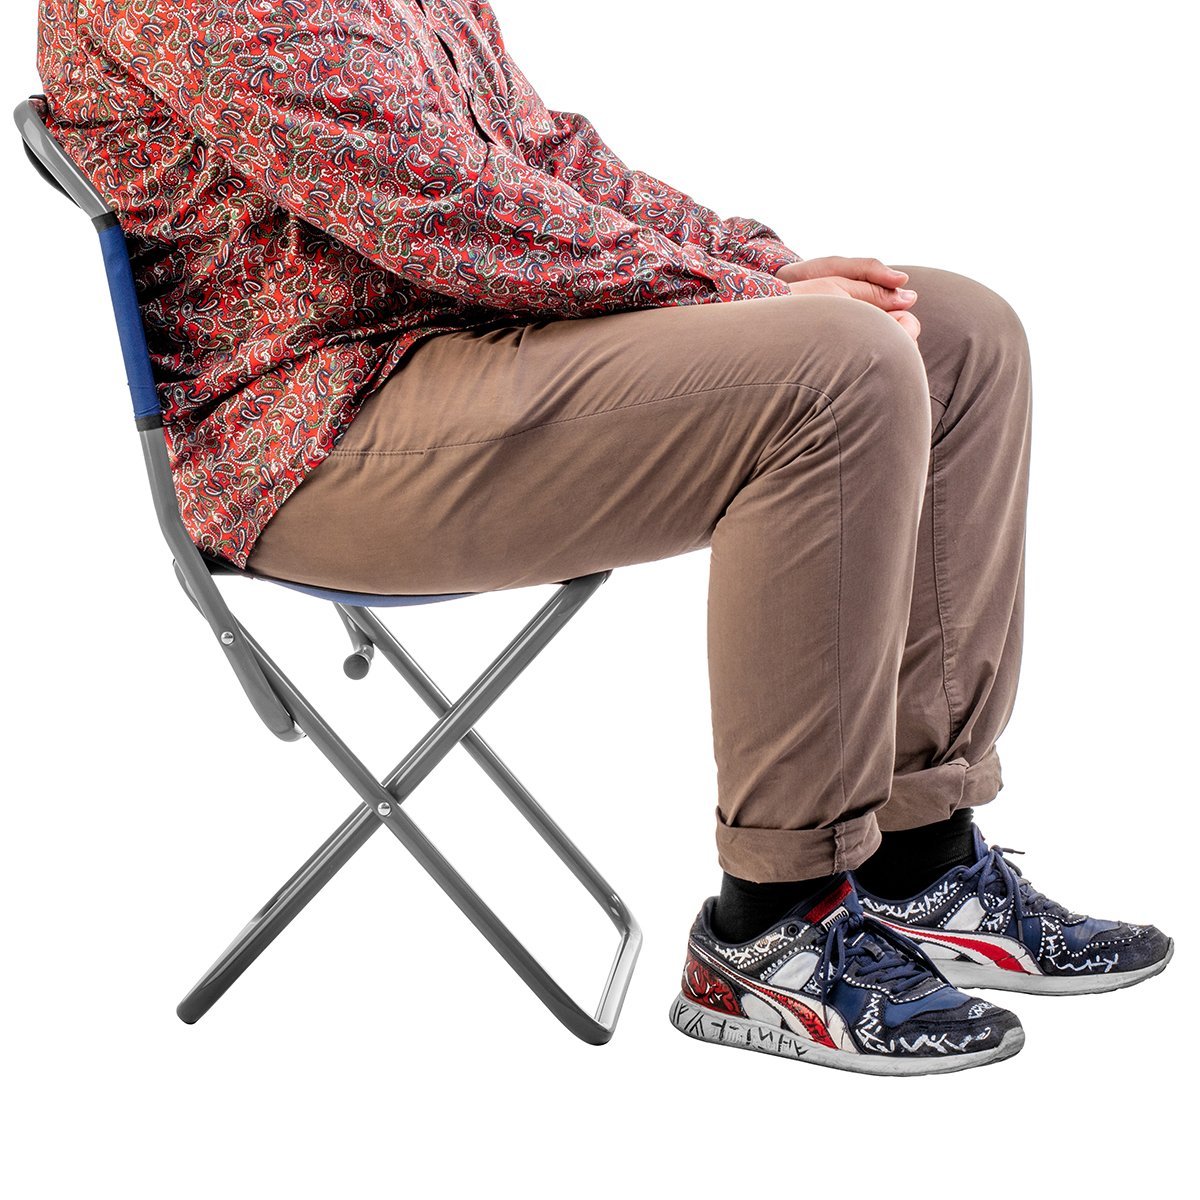 Man wearing shirt, trousers and snickers sitting on the folding camping chair with a back